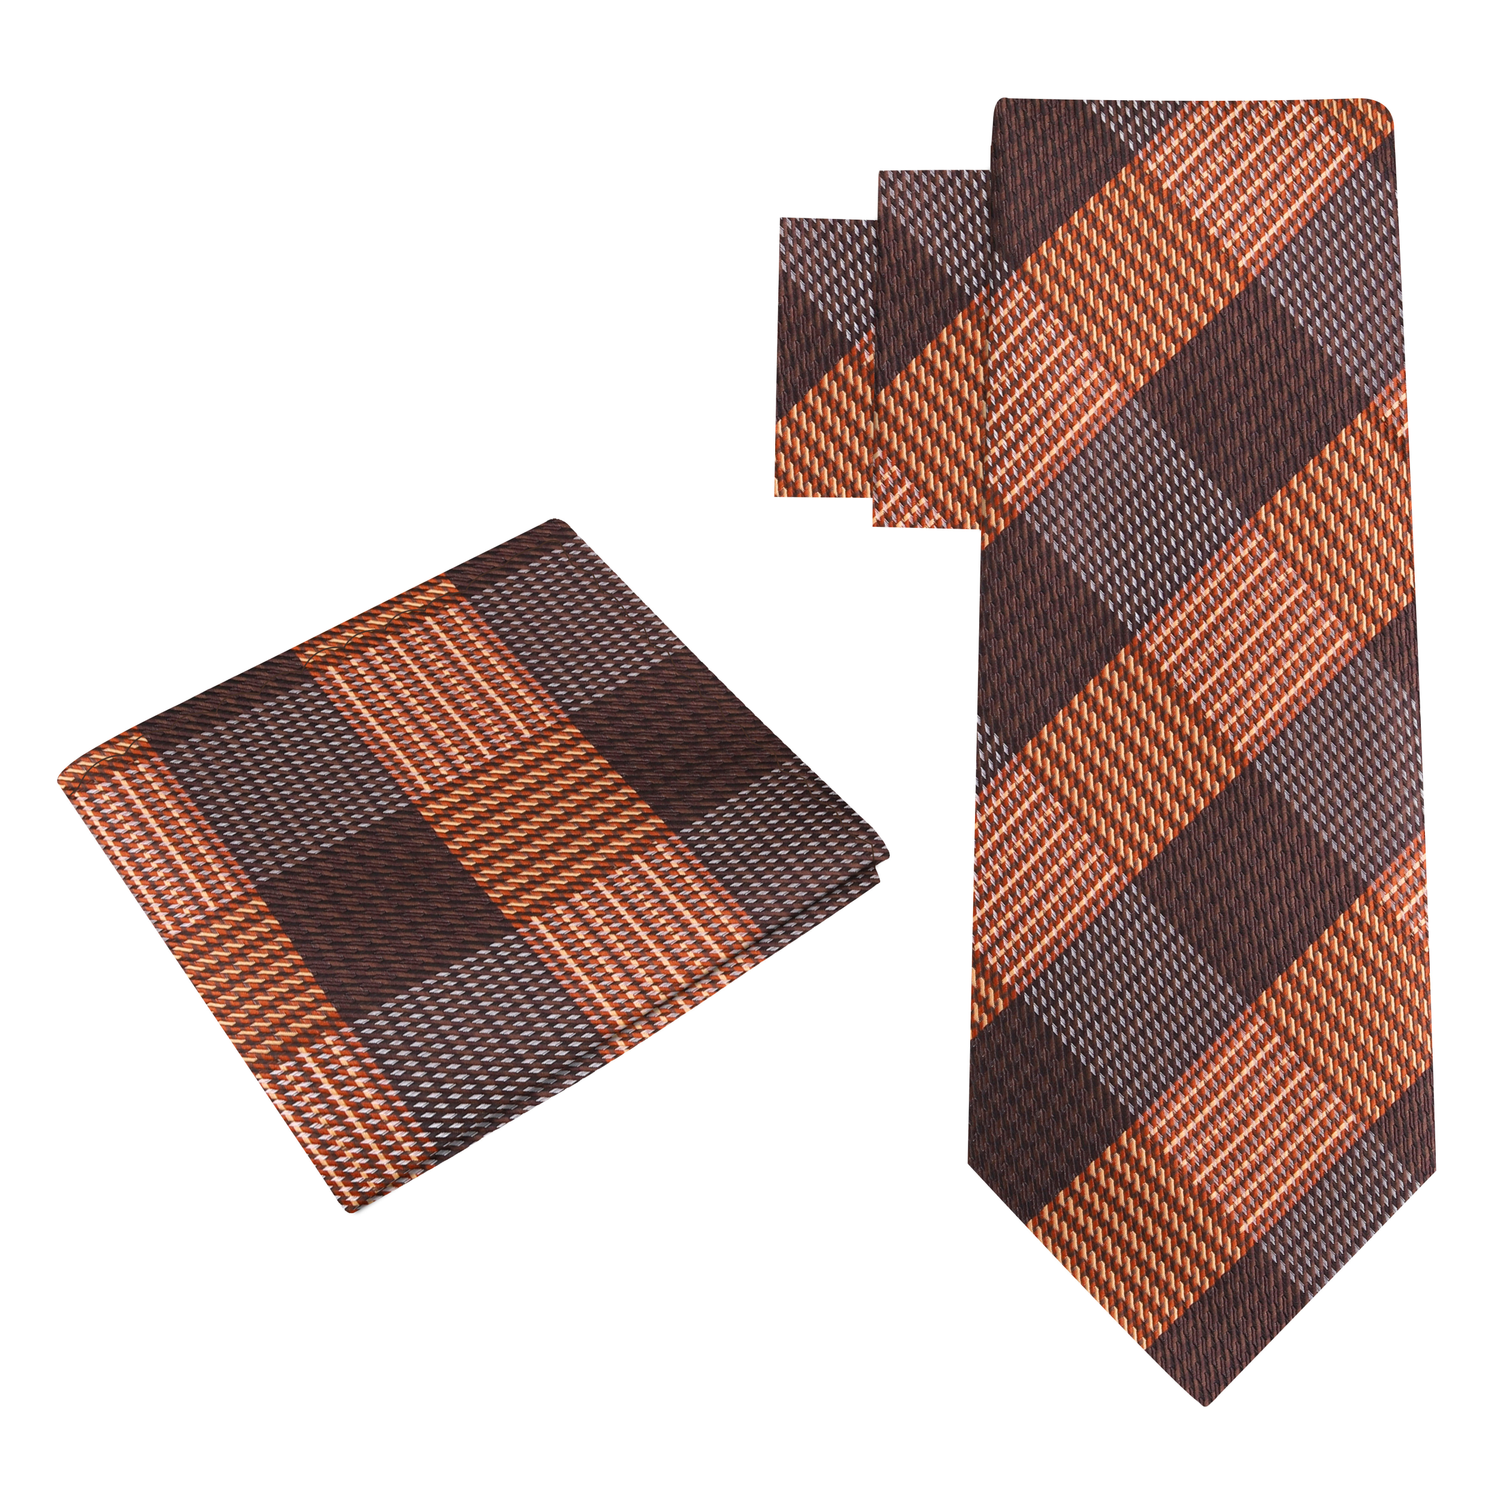 Alt View: Brown and Orange Plaid Tie and Square